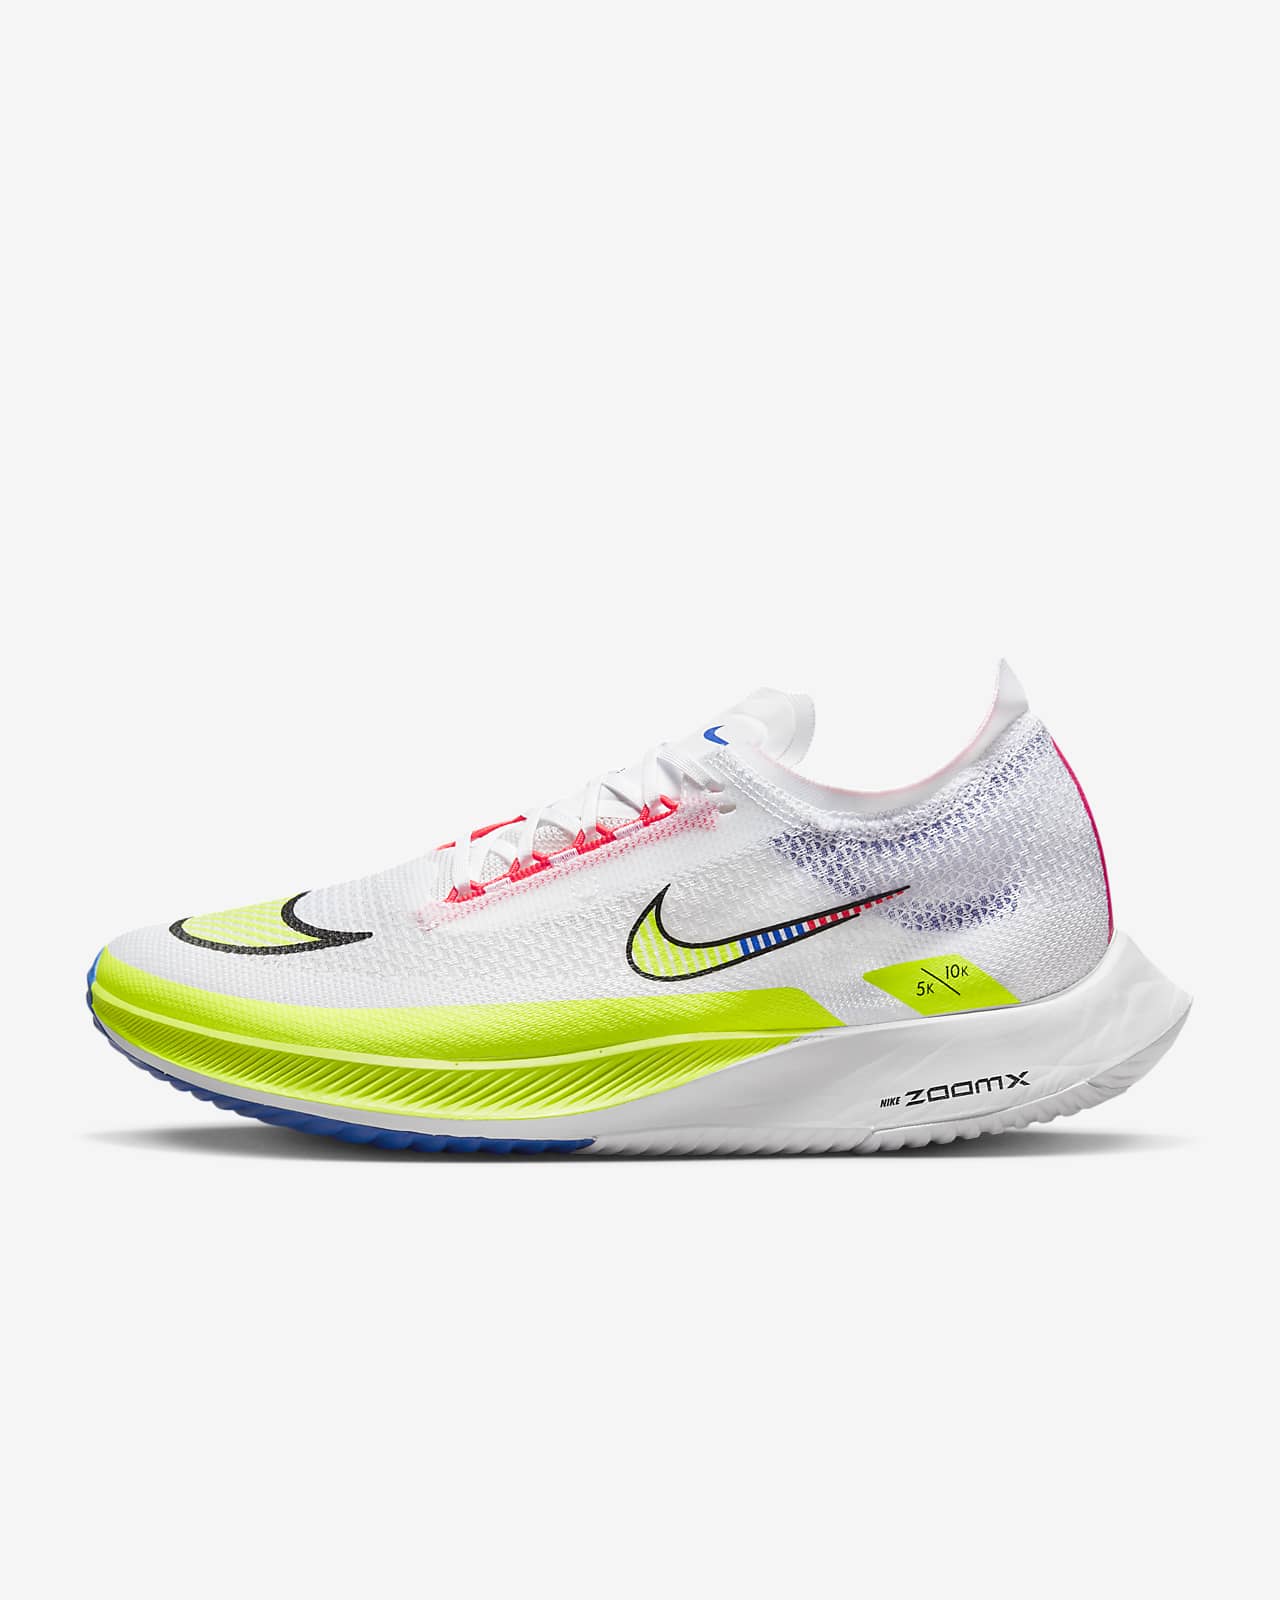 Nike ZoomX Streakfly Running Shoes DH9275-100 | SneakerNews.com